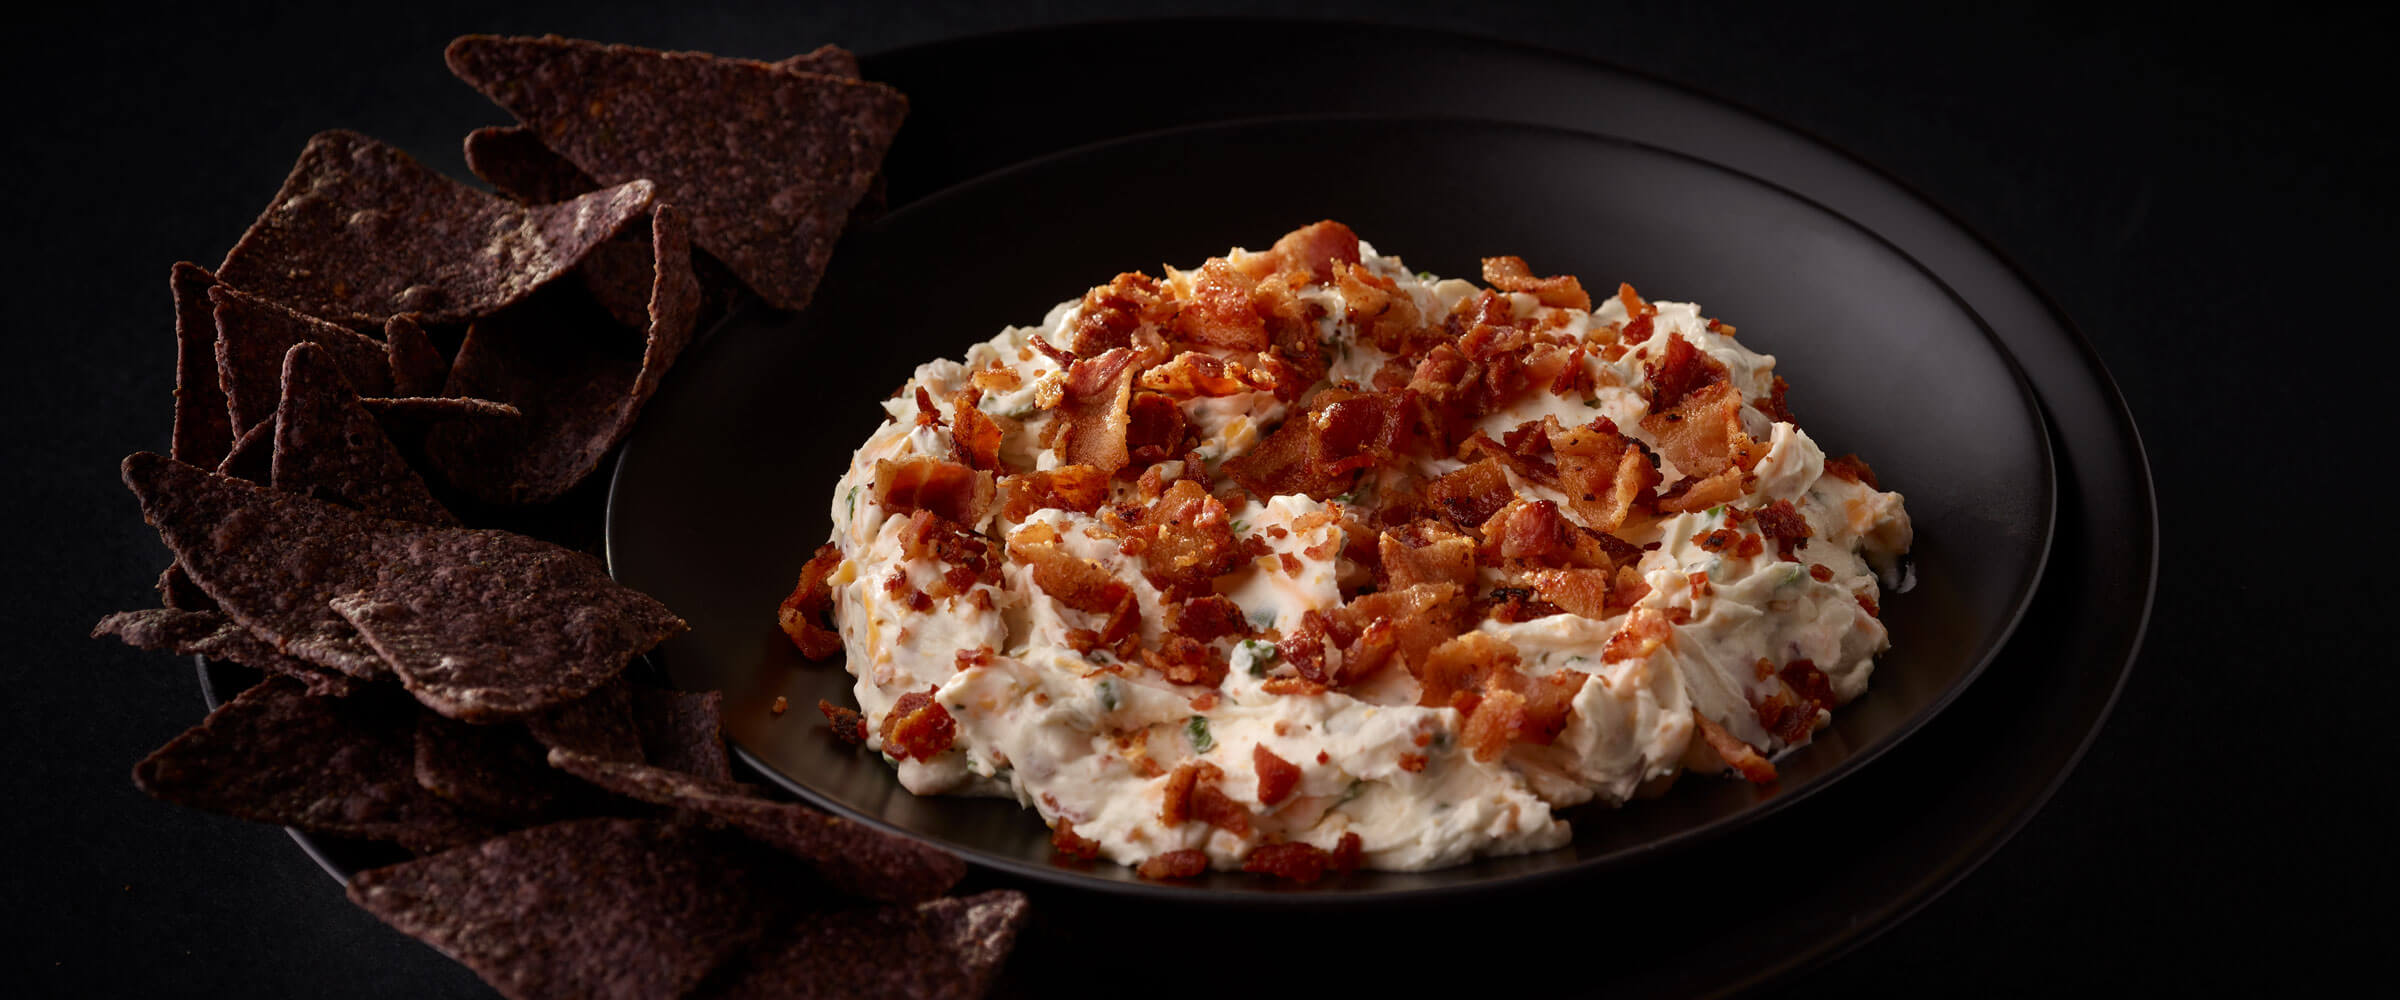 Bacon Ranch dip in black bowl with chips